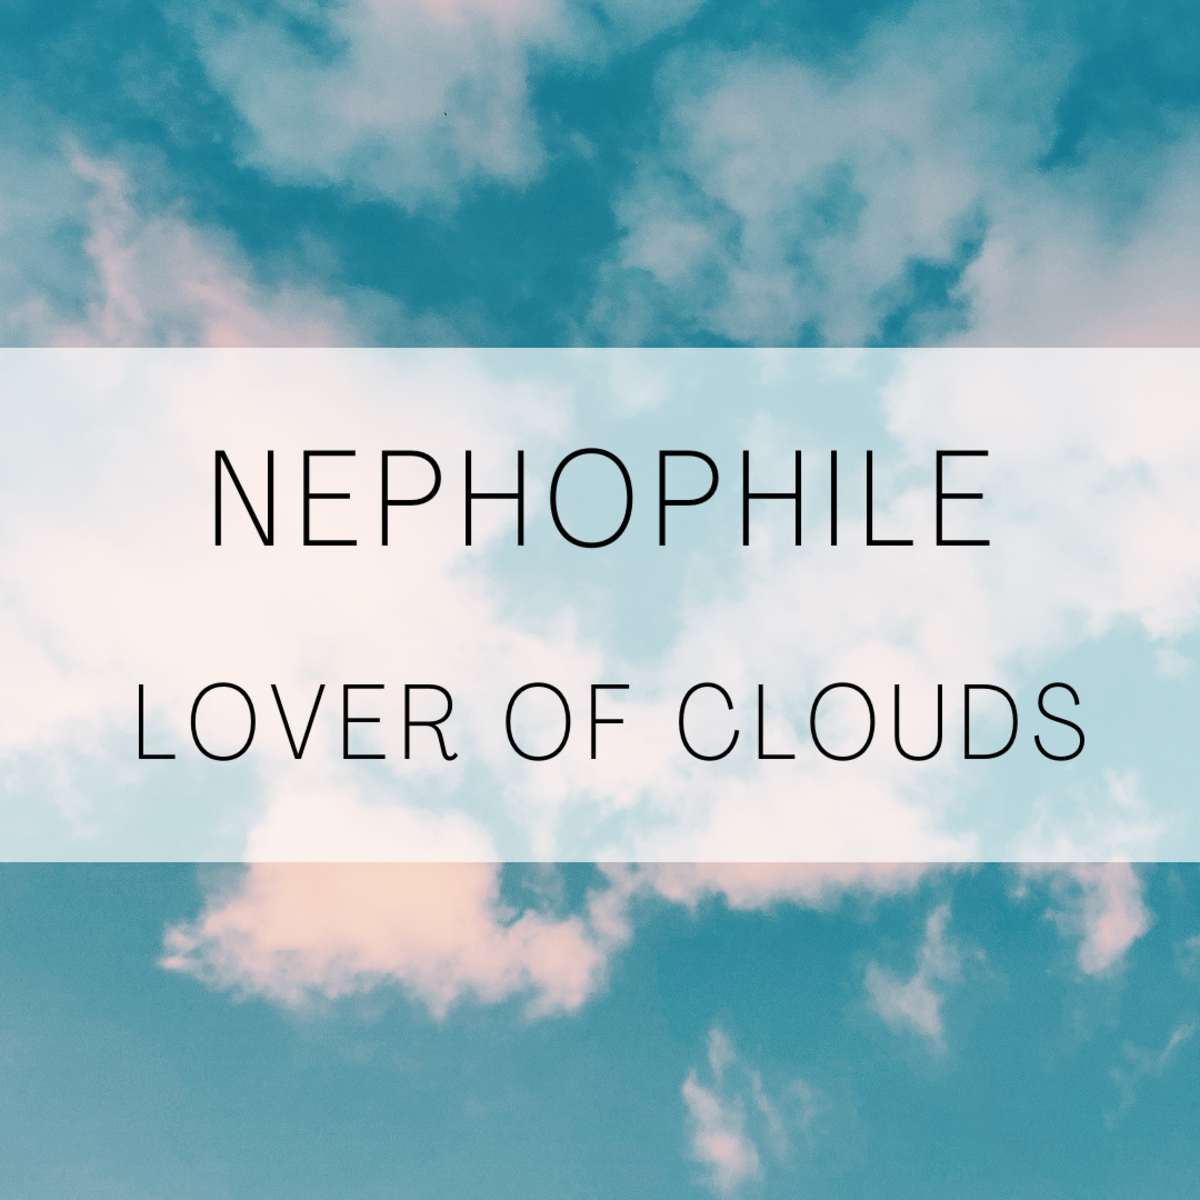 Nephophile, a lover of clouds